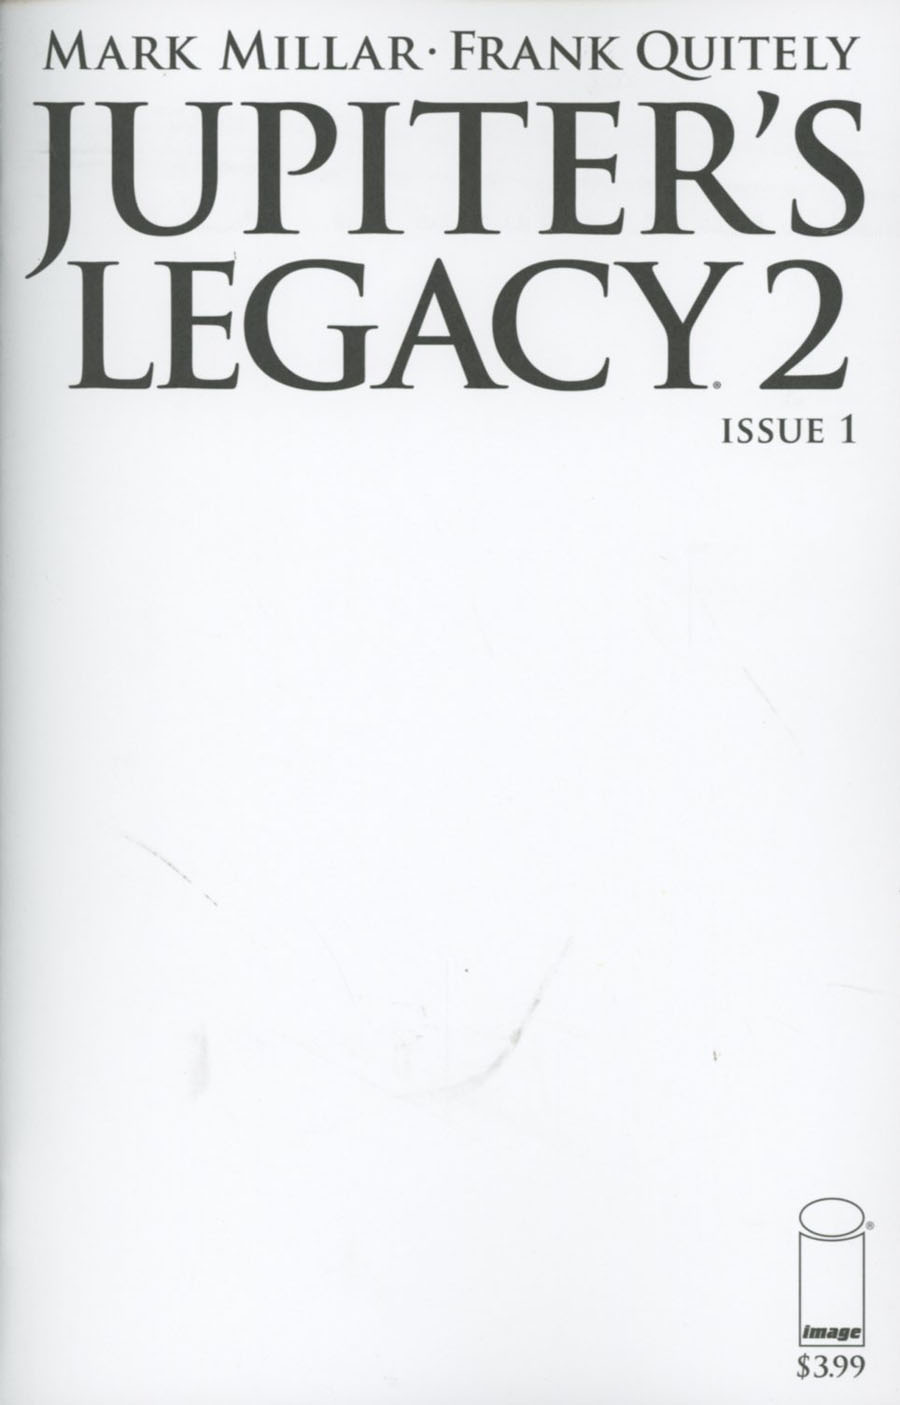 Jupiters Legacy Volume 2 #1 Cover D Blank Cover